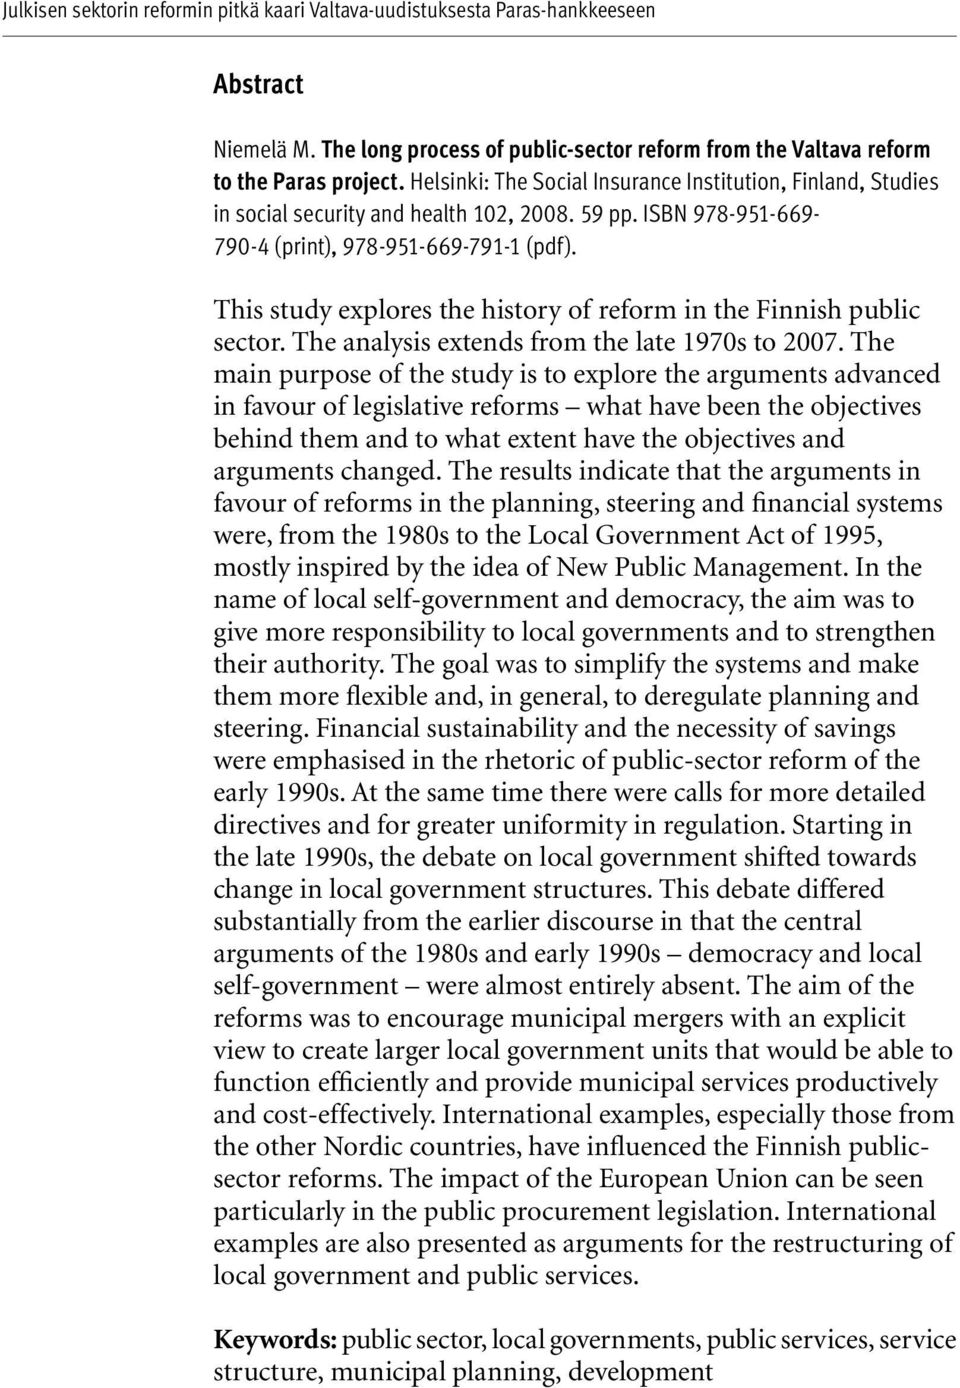 This study explores the history of reform in the Finnish public sector. The analysis extends from the late 1970s to 2007.